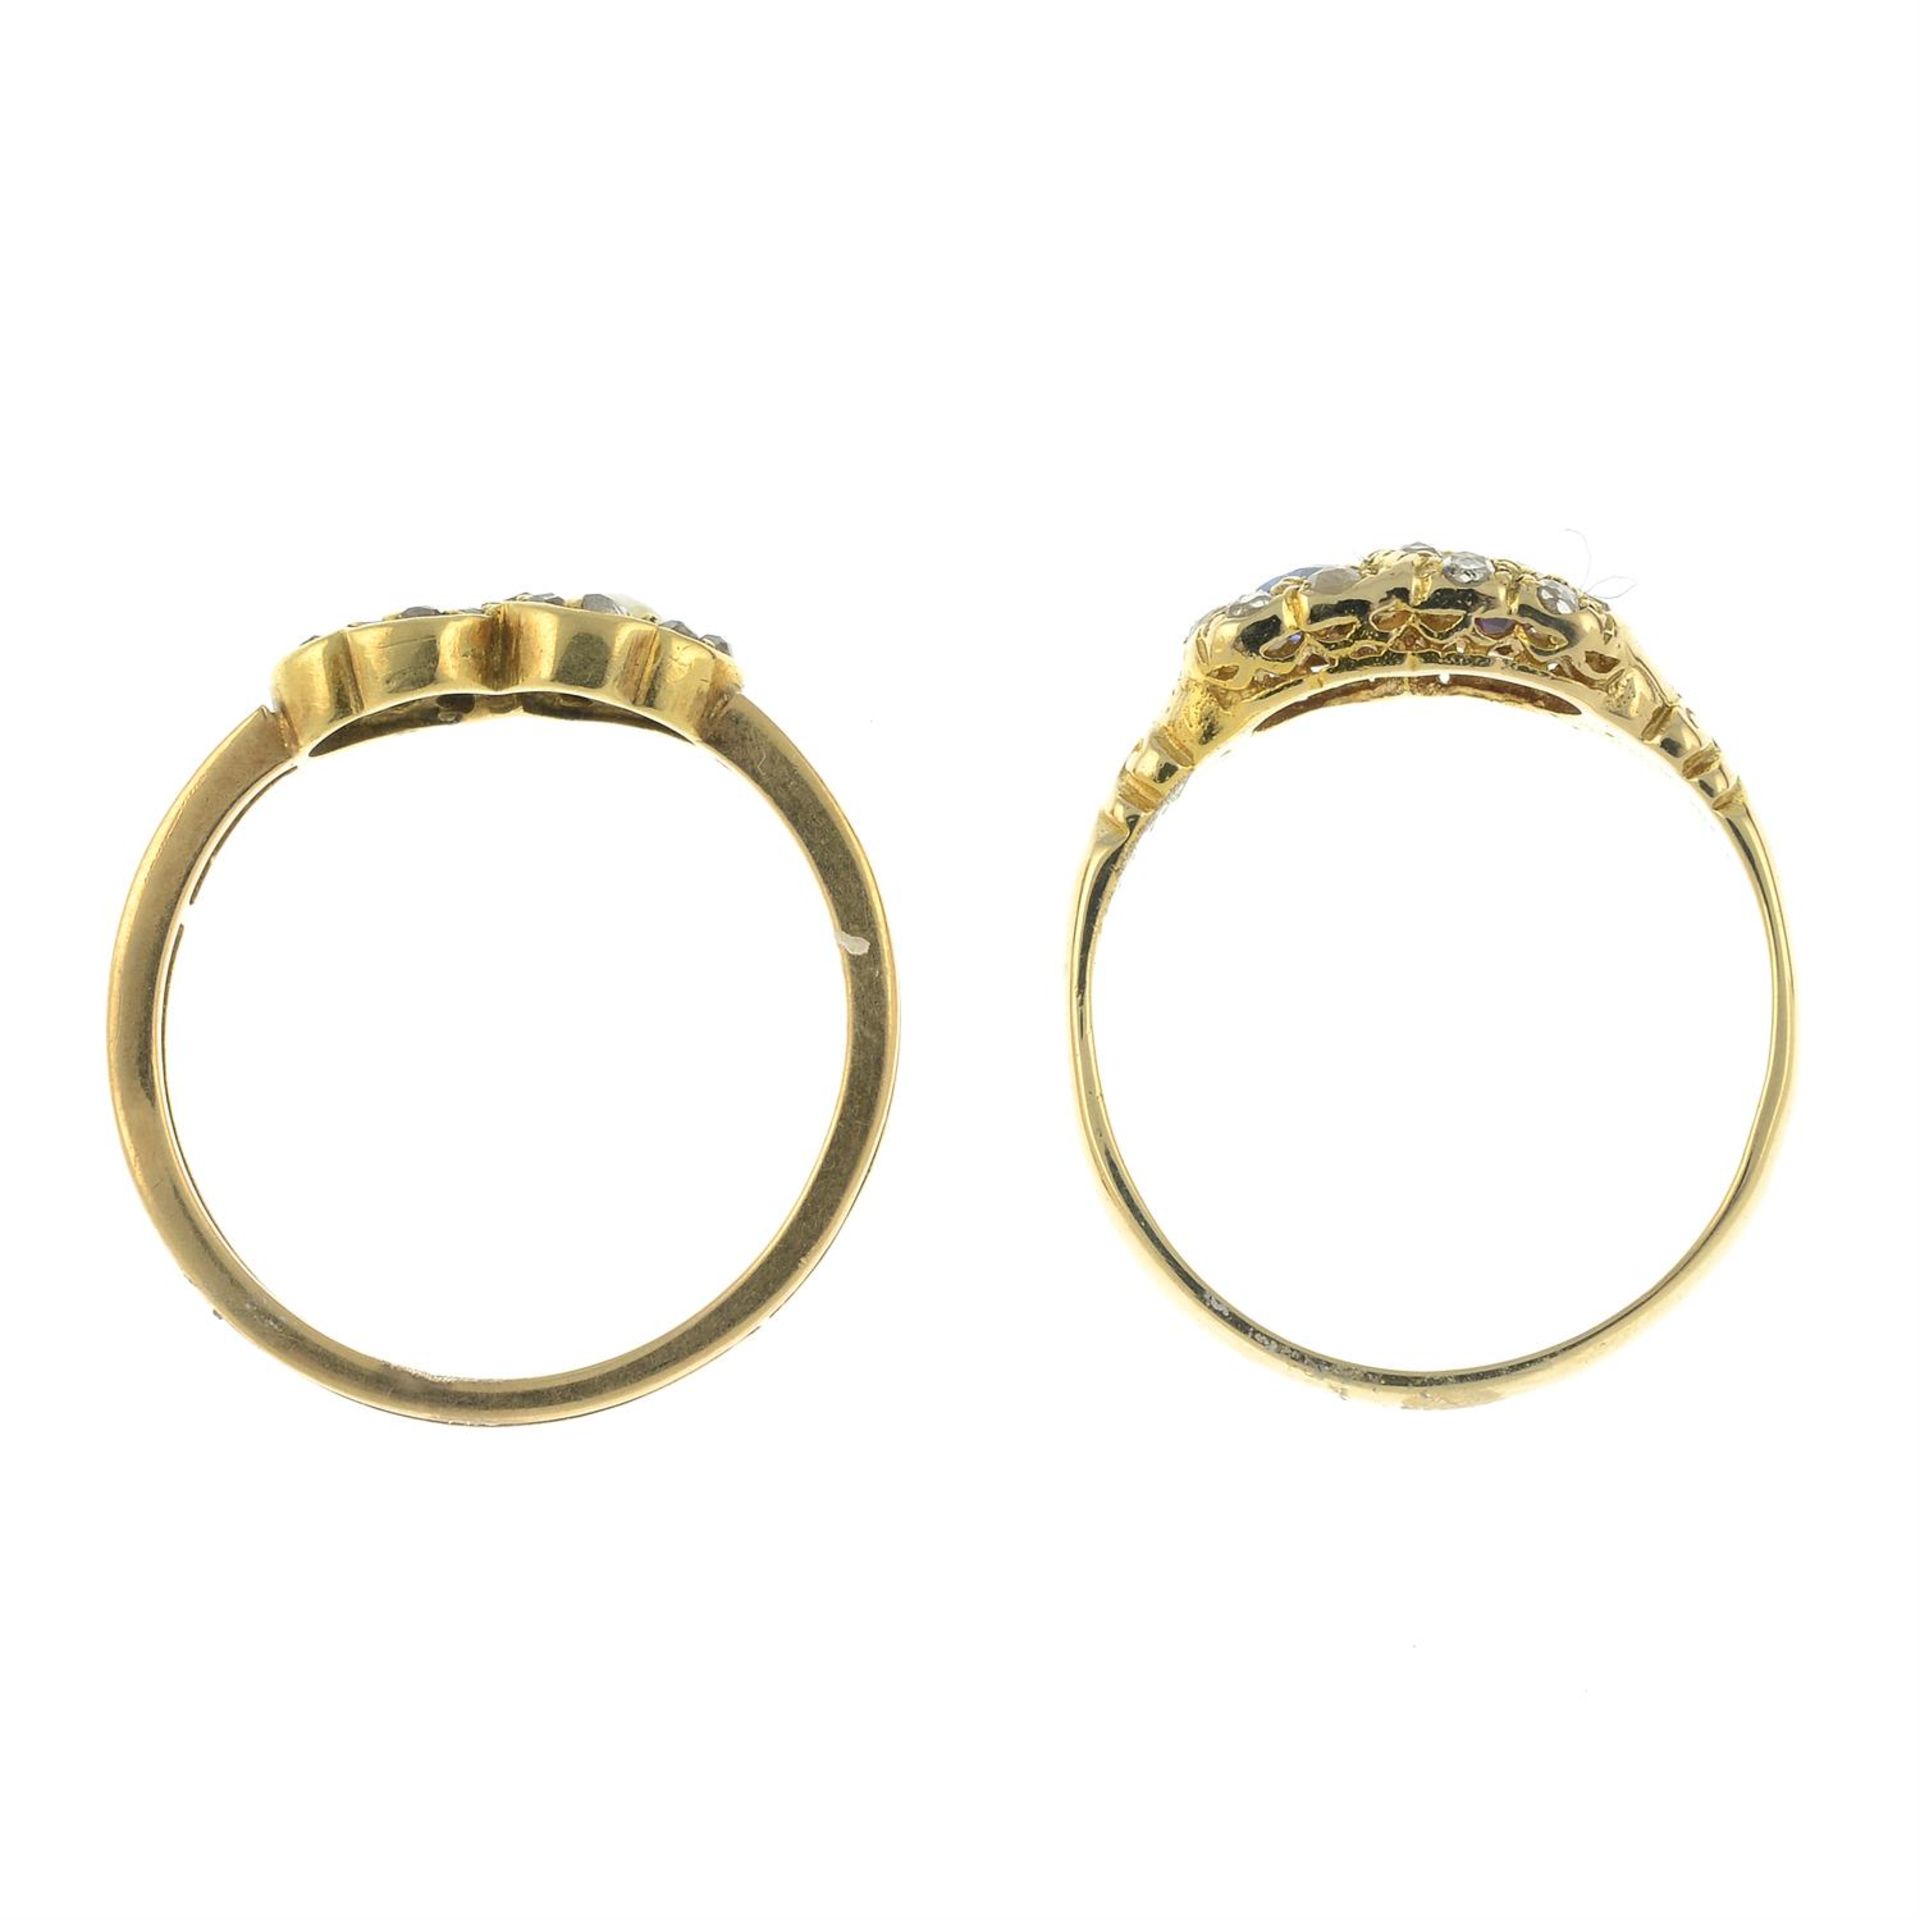 Two late 19th century gold gem-set double heart rings. - Image 5 of 6